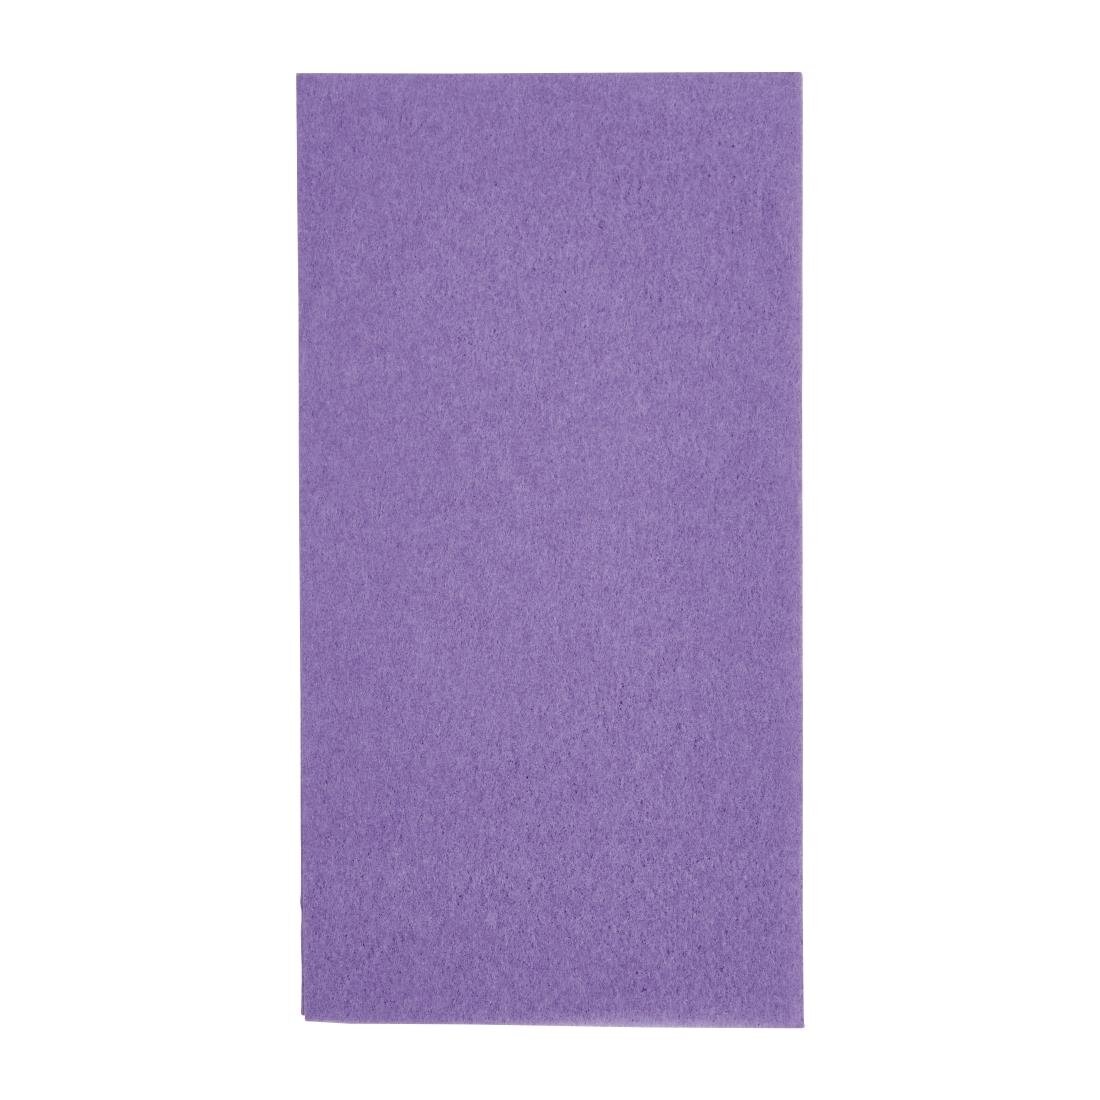 Fiesta Recyclable Lunch Napkin Plum 33x33cm 2ply 1/8 Fold (Pack of 2000)